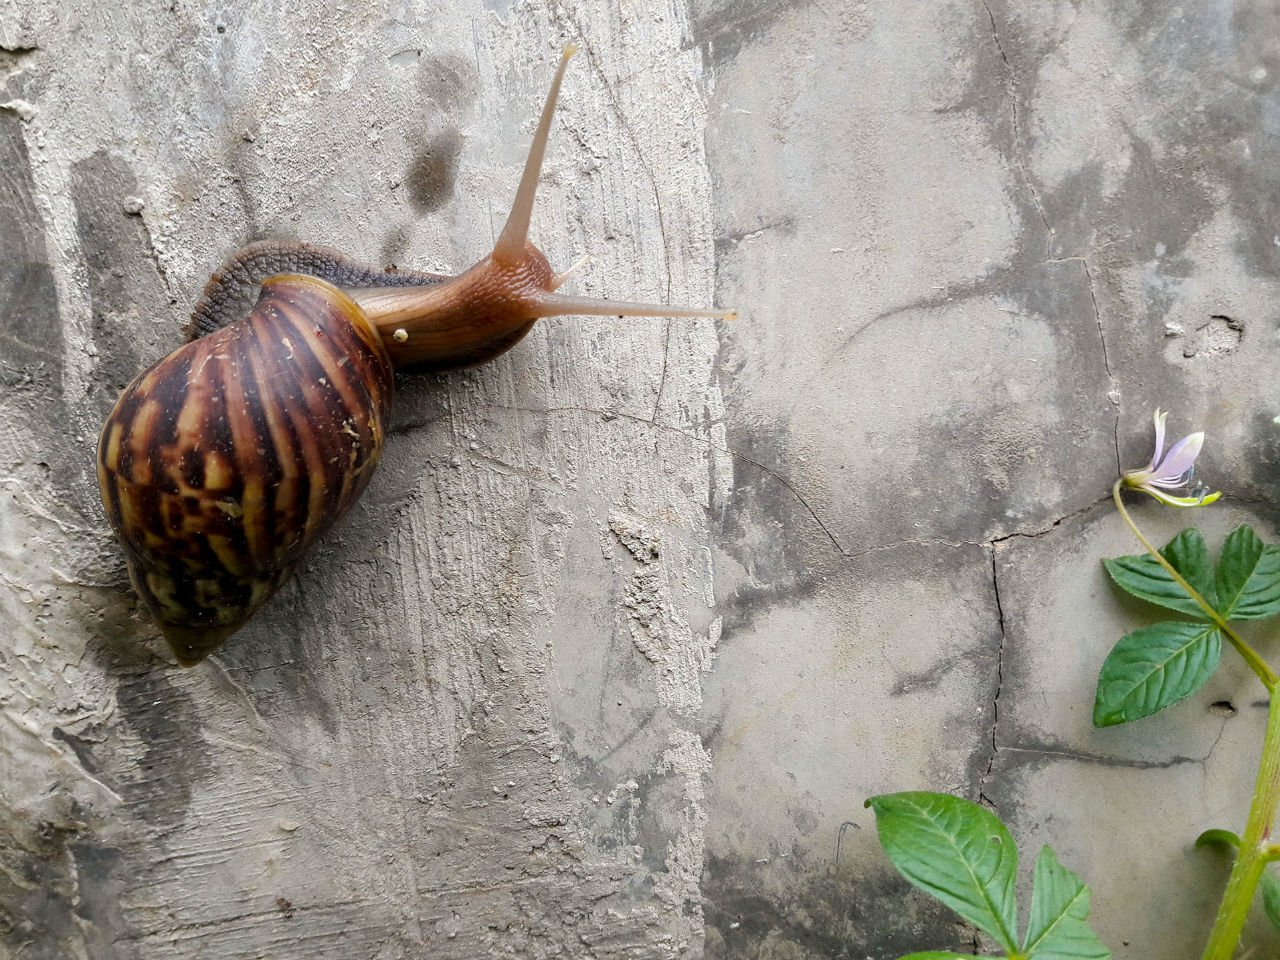 Repel garden pests like this snail on the wall with natural ingredients from your kitchen